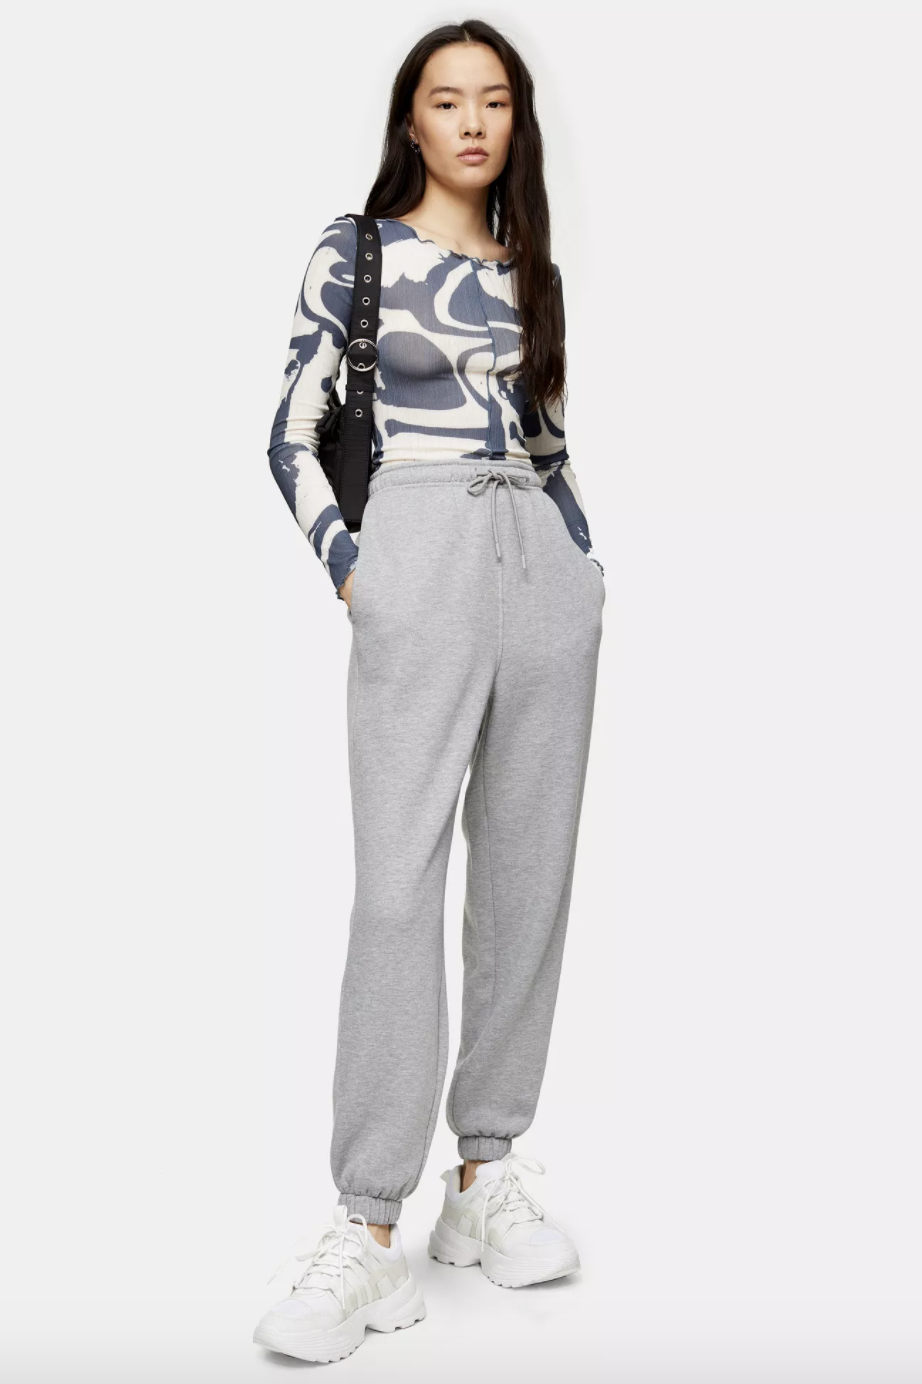 3 Easy Sweatpants Outfit Ideas That Actually Look Cute